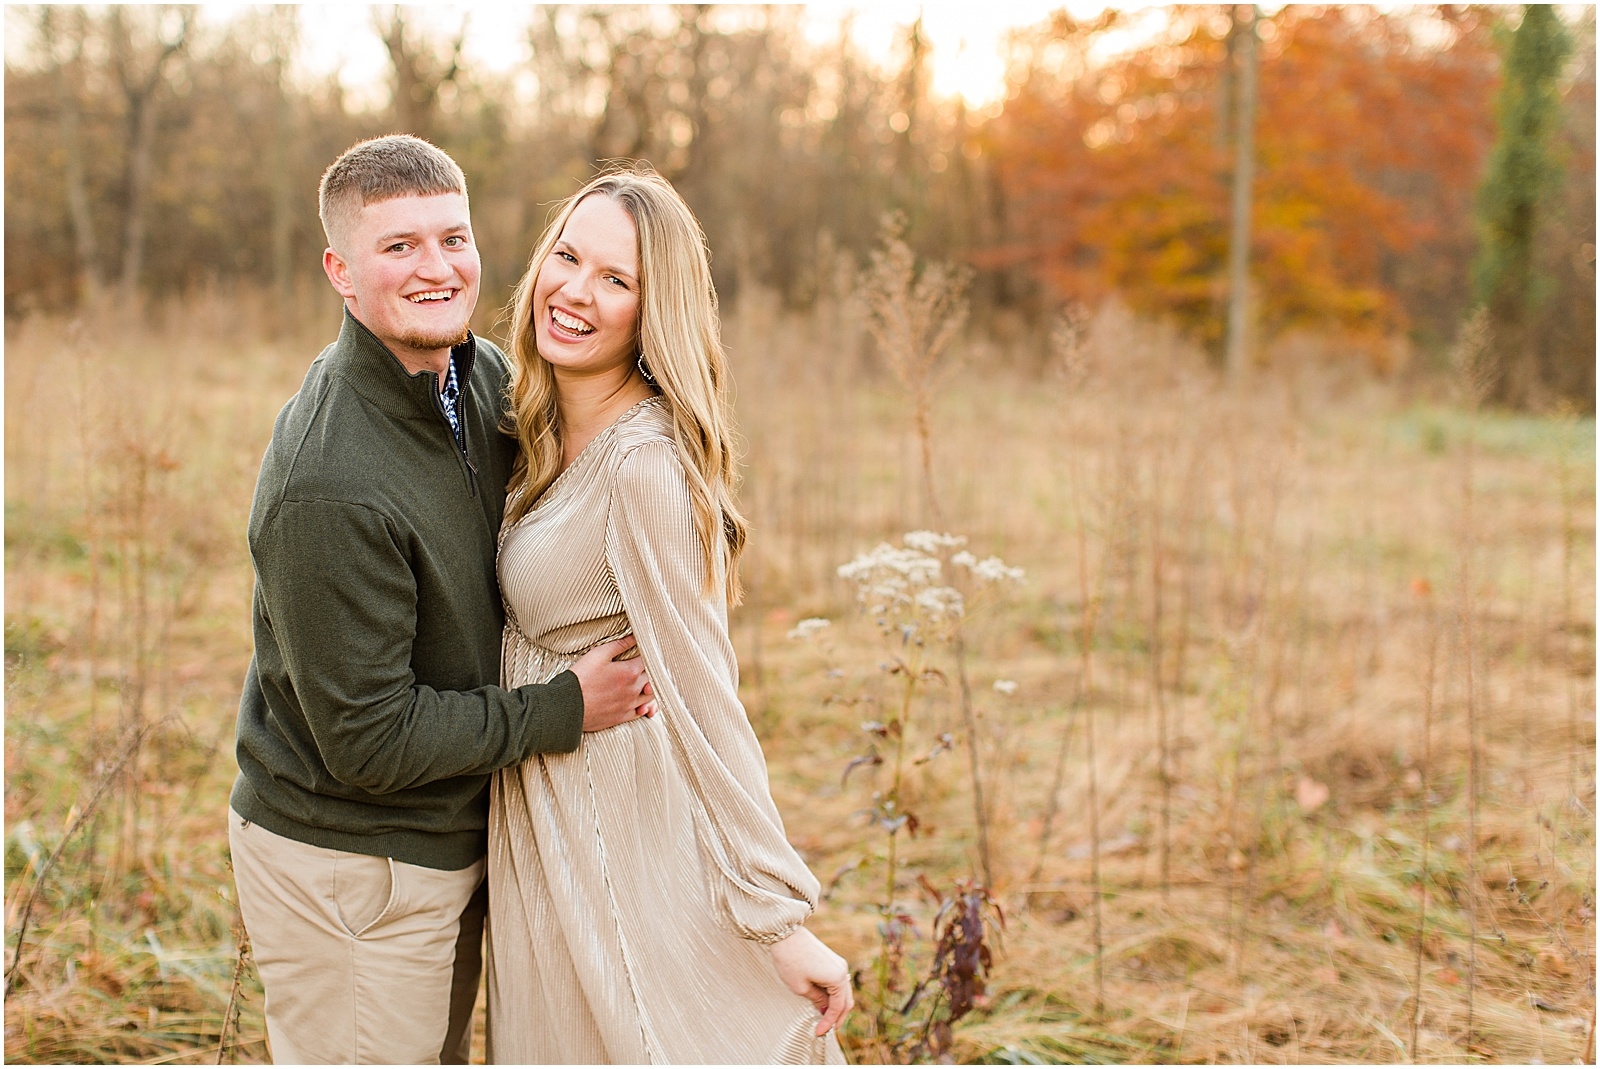 A Fall Southern Indiana Engagement Seesion | Cody and Hannah | Bret and Brandie Photography 043.jpg